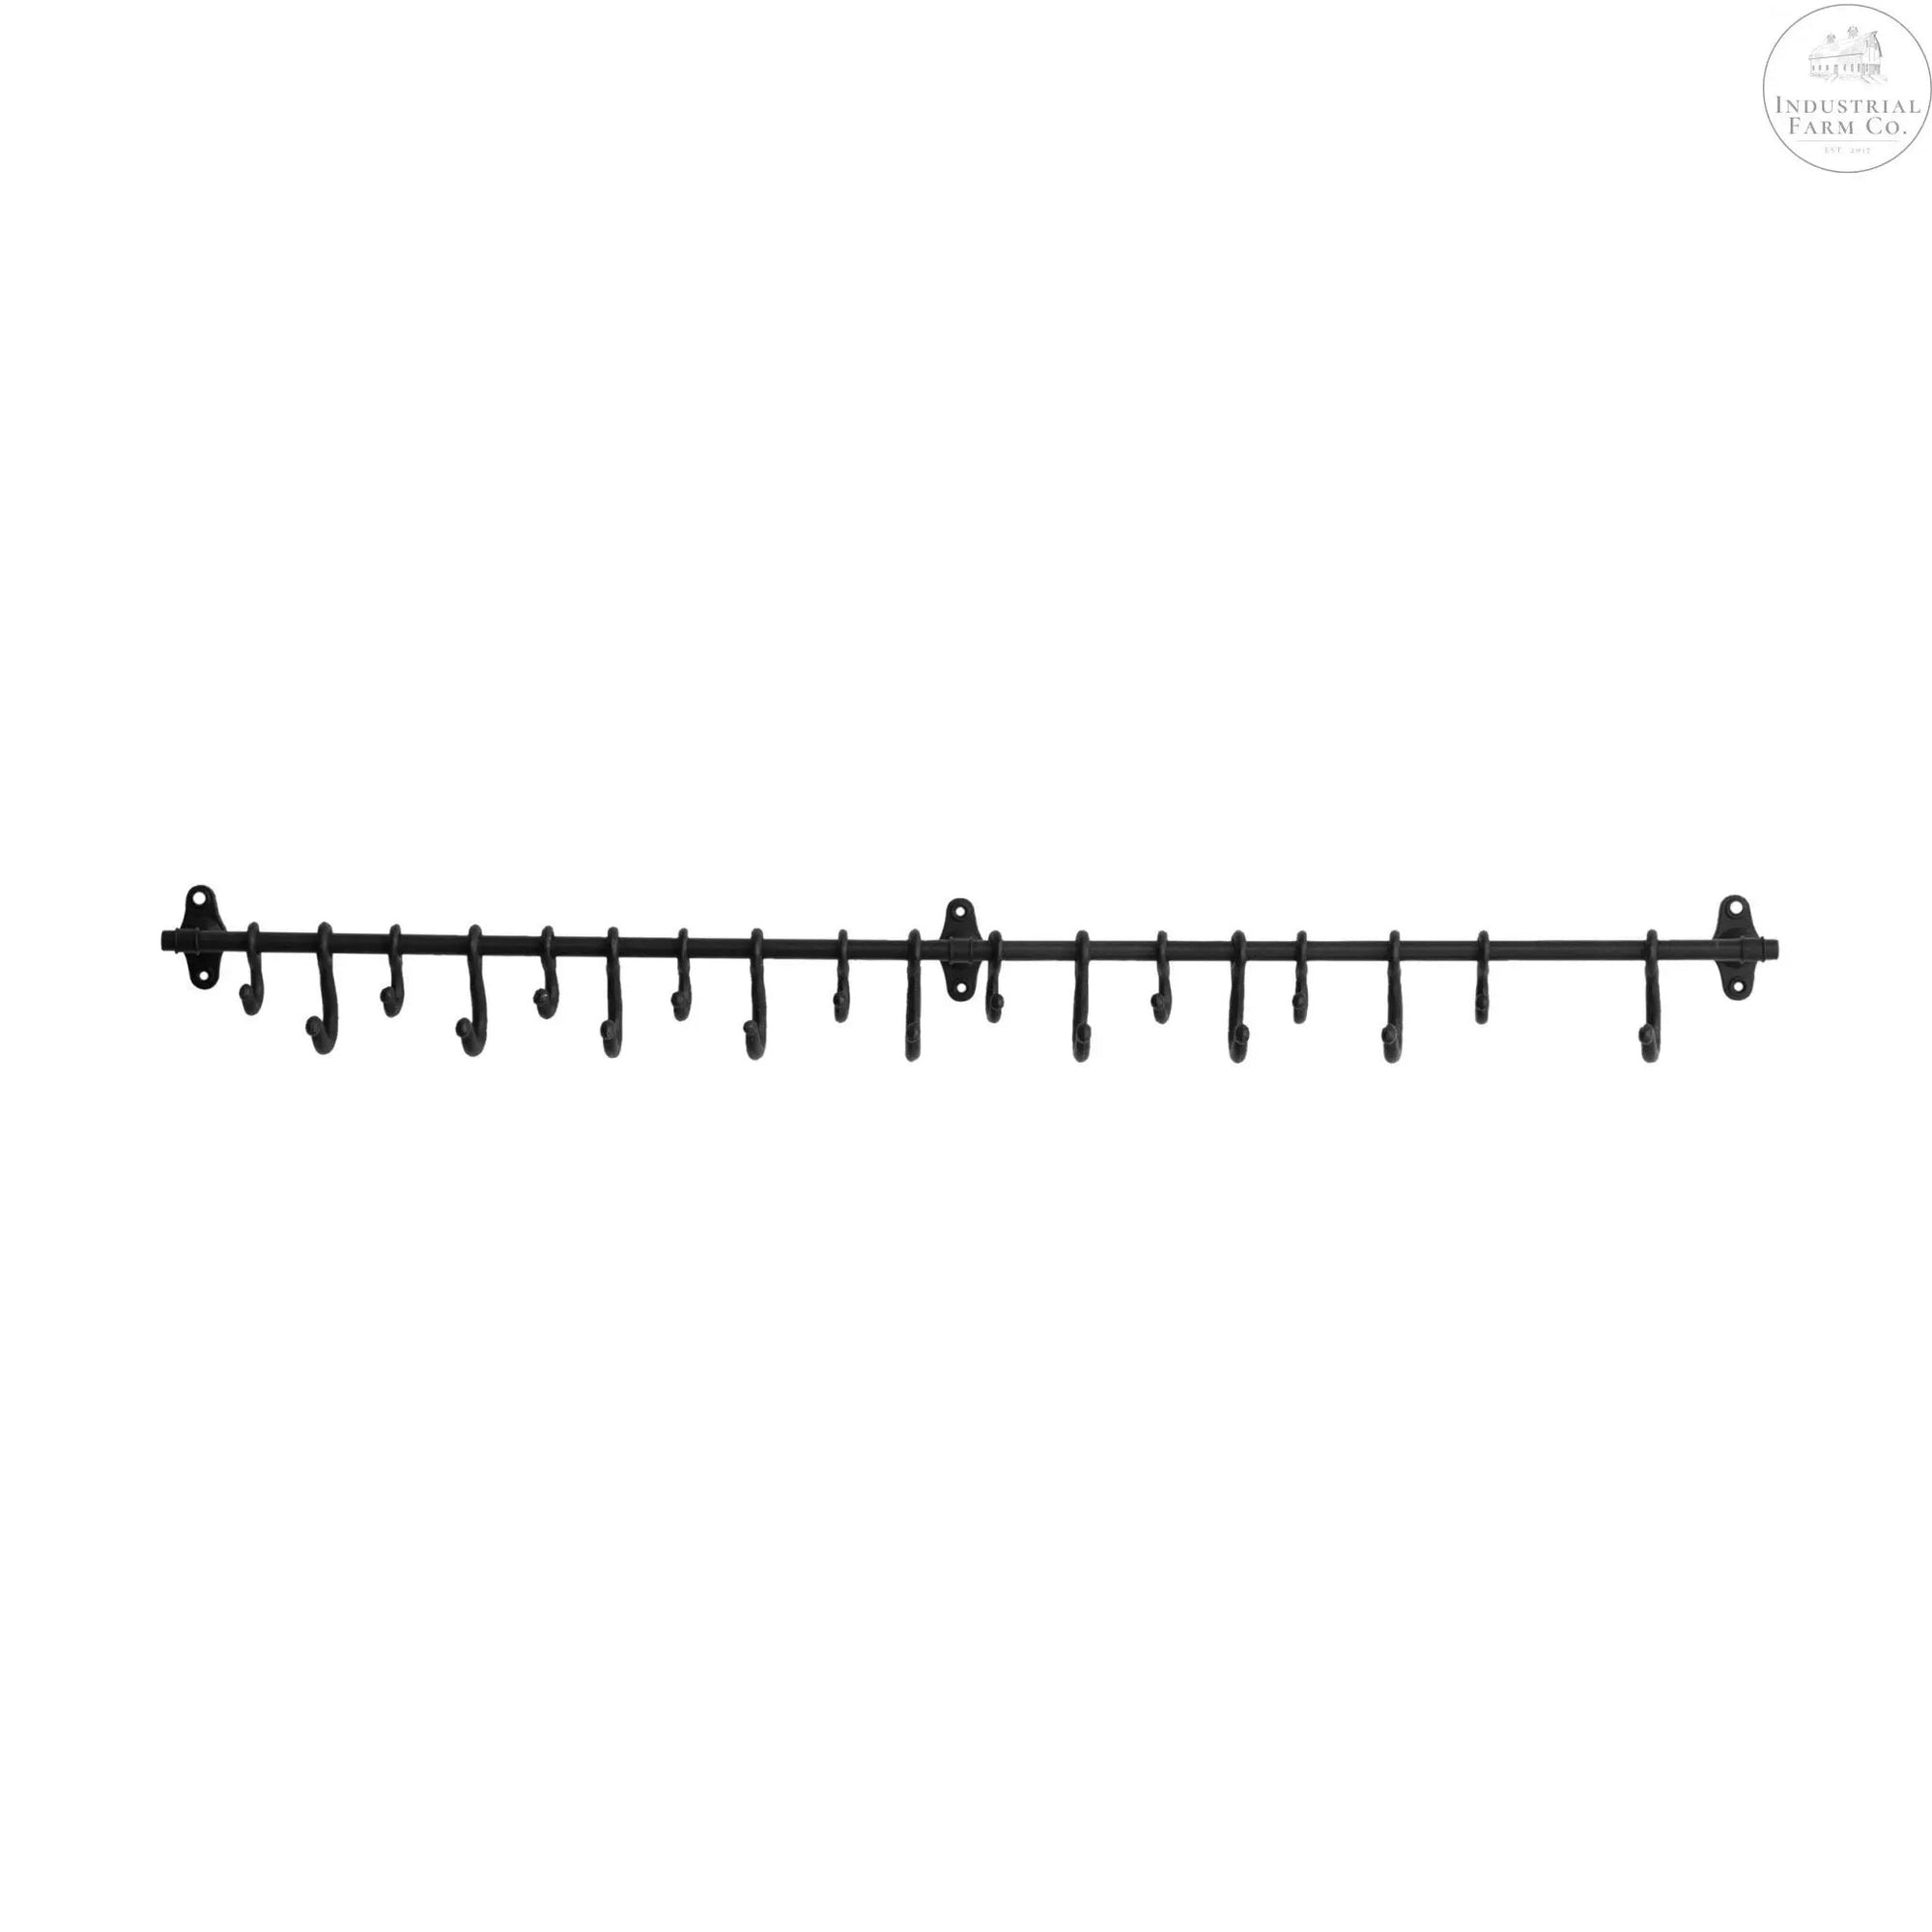 Forged Metal Wall Rod with Hooks     | Industrial Farm Co